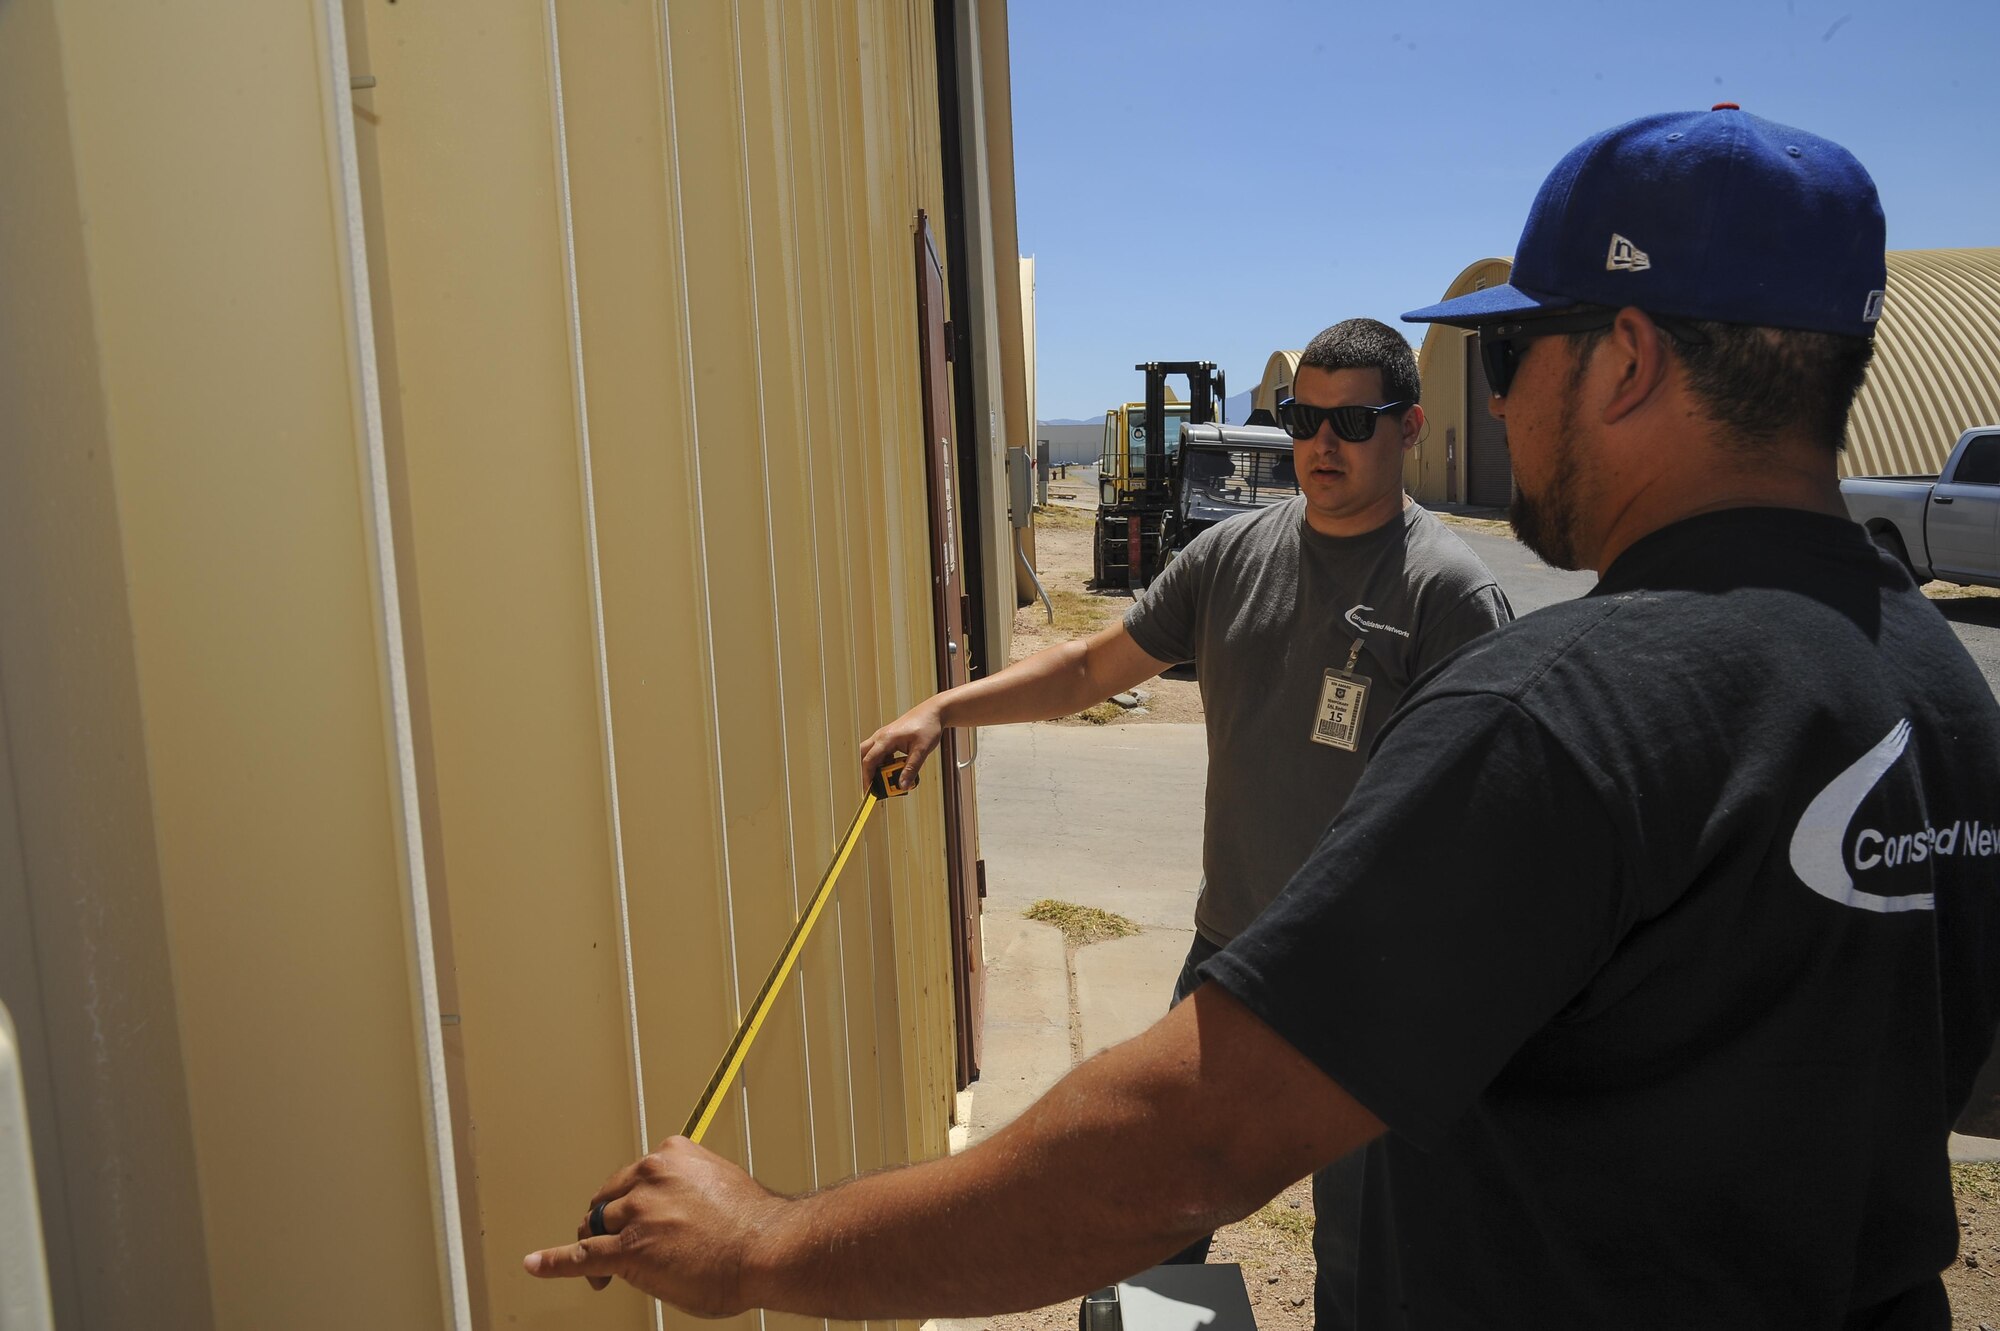 Brodie Carrier and Mark Webber, Consolidated Networks fiber technicians, take measurements for a bracket for a communications cabinet installation at the 309th Aircraft Maintenance and Regeneration Group at Davis-Monthan Air Force Base, Ariz., May 24, 2017. The contractors and 355th Communications Squadron Airmen have been in the process of creating and executing a modification plan, upgrading D-M’s network without interfering with any of the Desert Lightning Team’s connectivity. (U.S. Air Force photo by Senior Airman Mya M. Crosby)